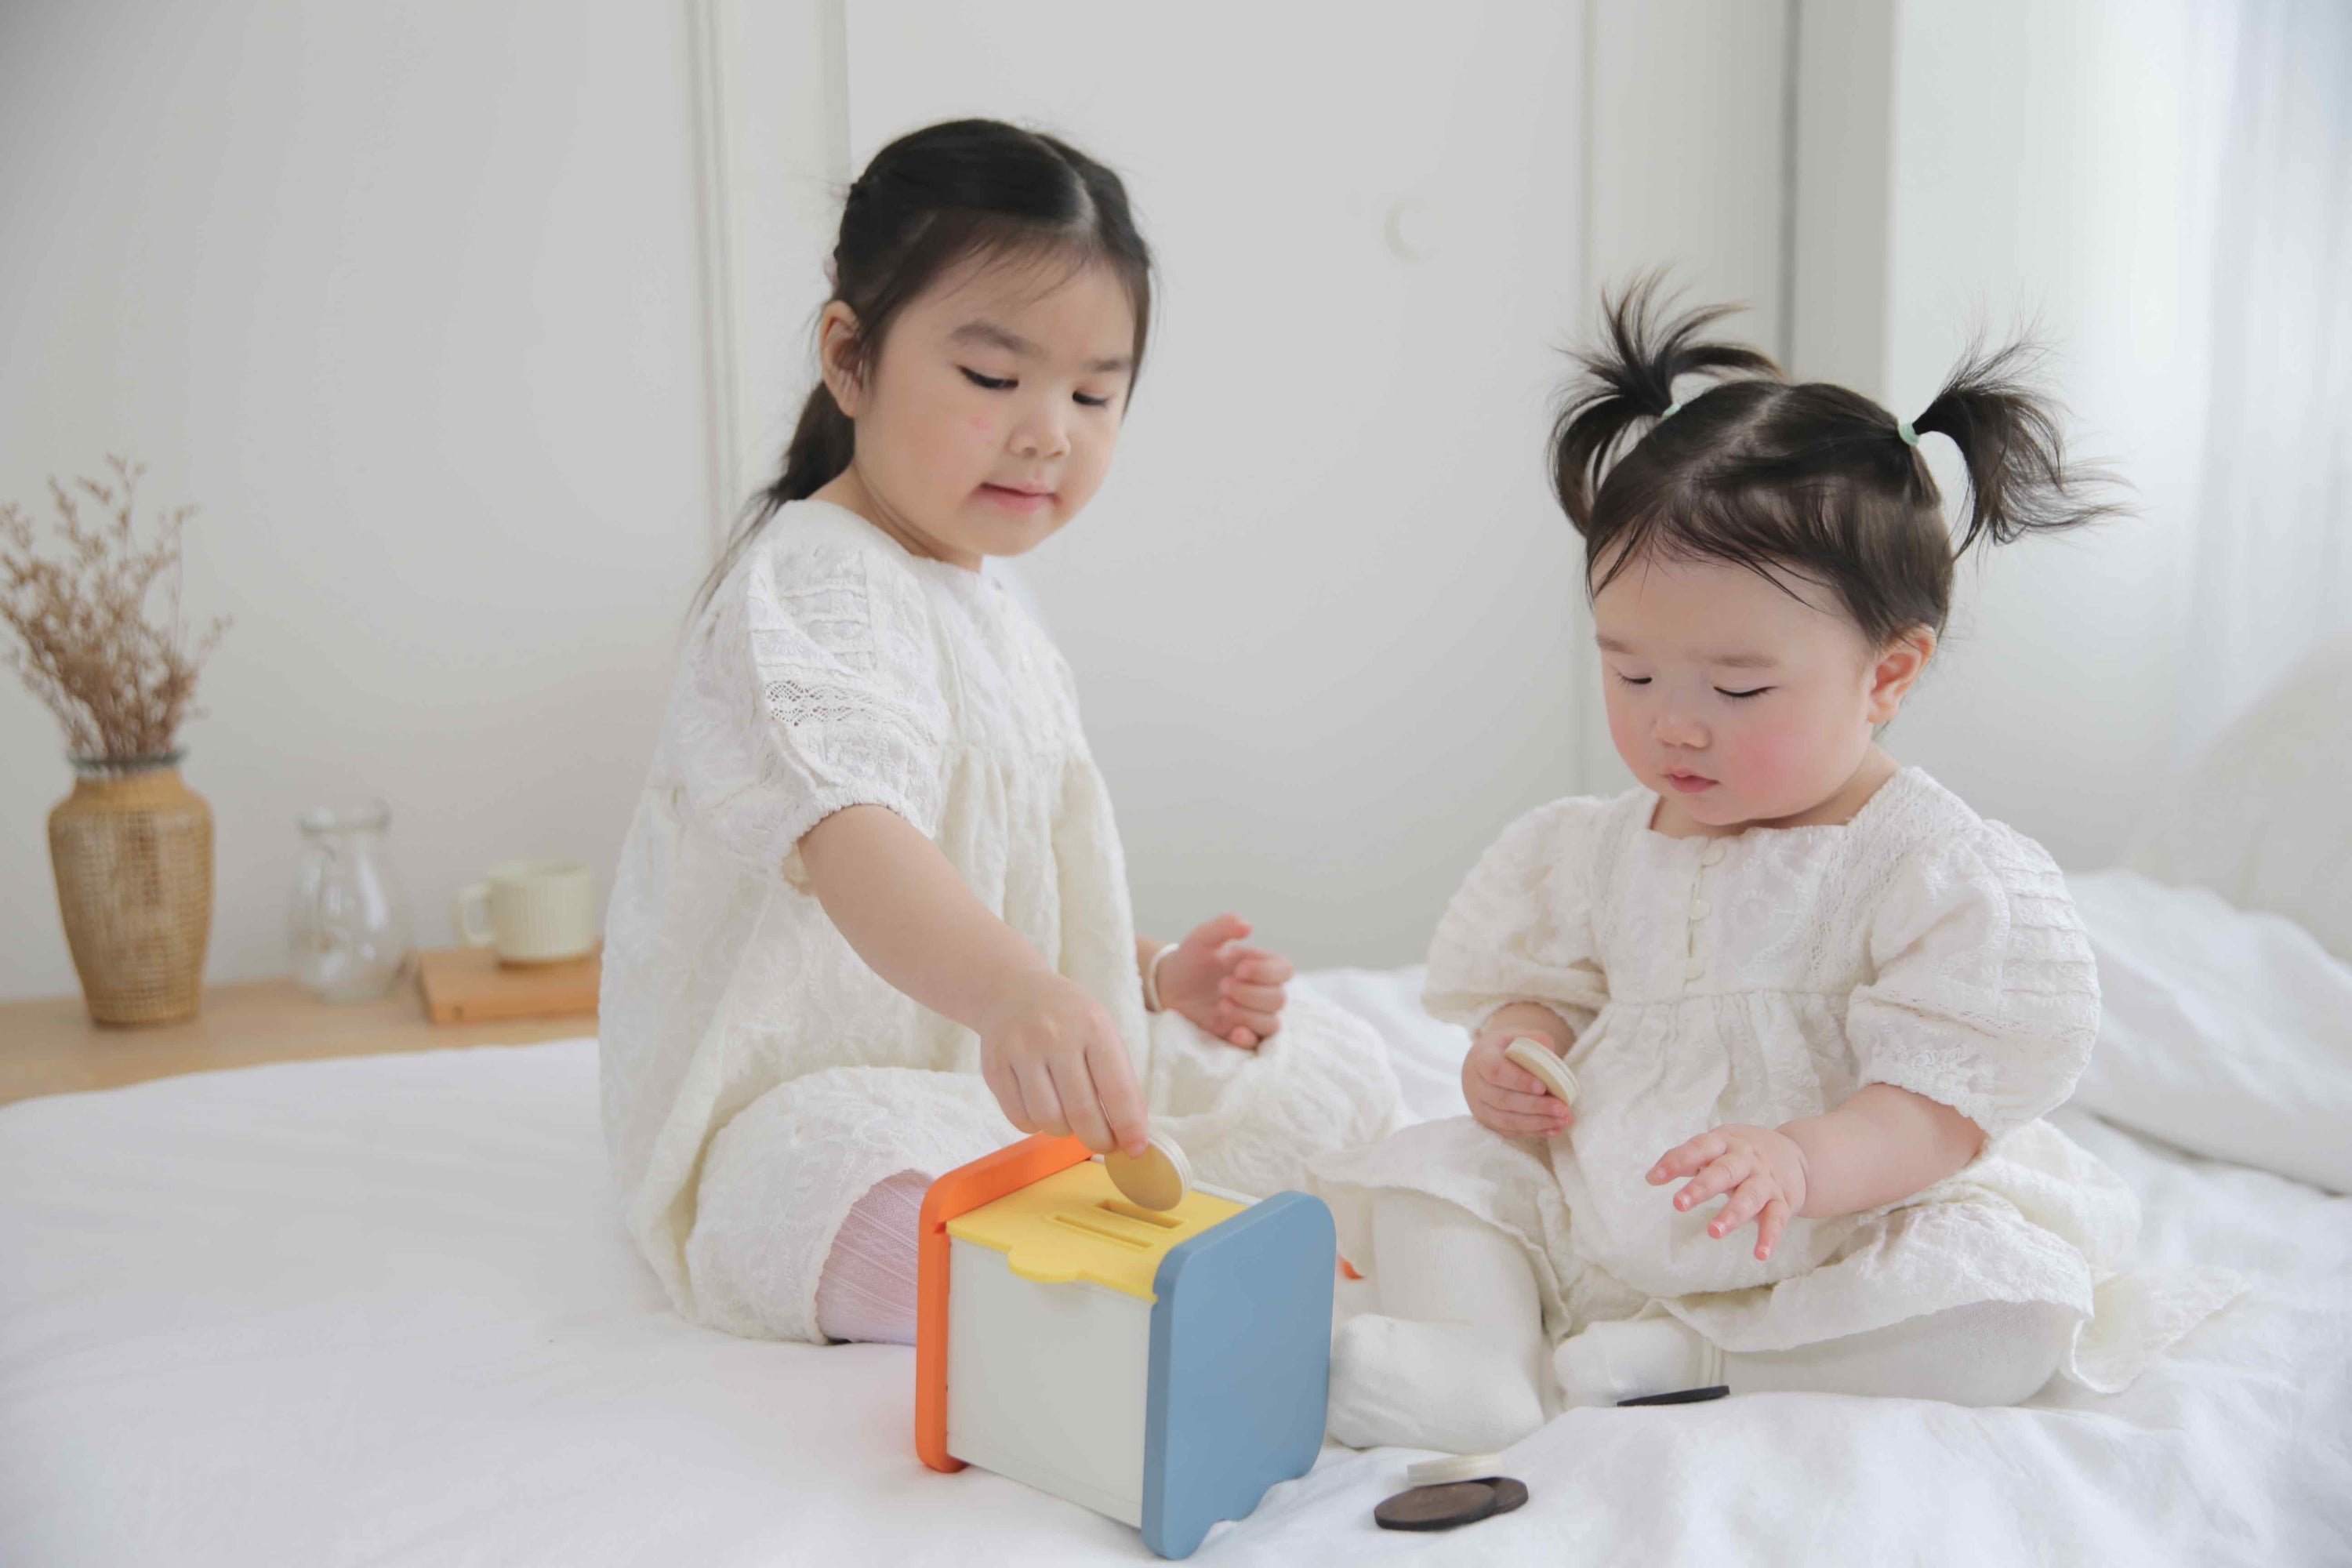 A guide to Montessori toys: What are they and are they worth buying?